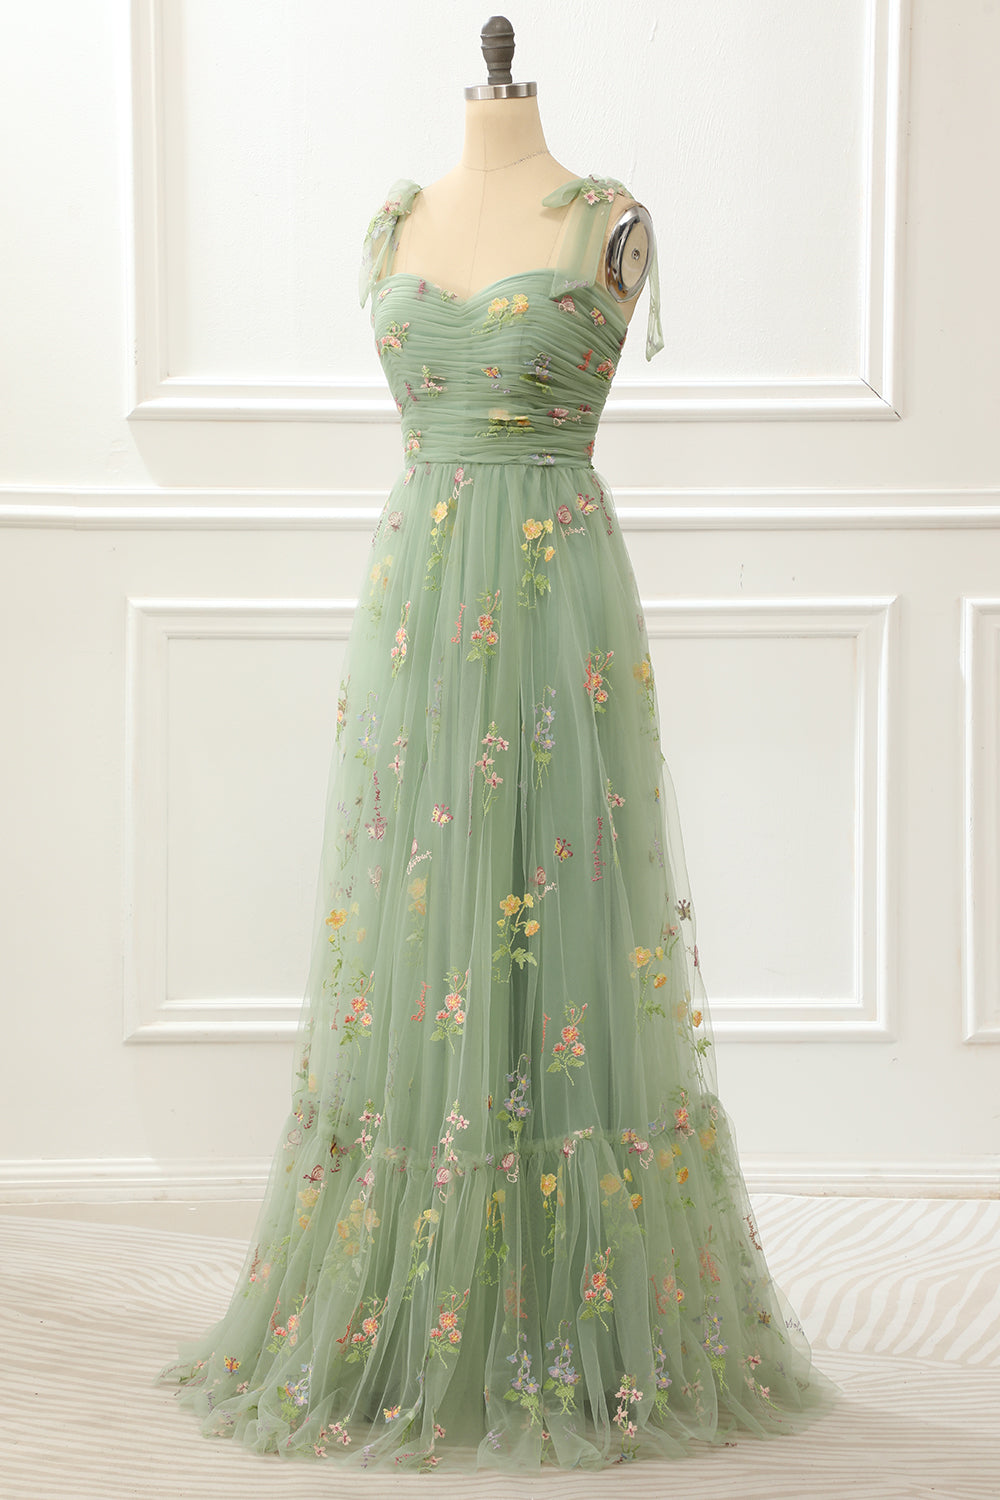 Bow Dress, Tulle Green A Line Prom Dress with Embroidery